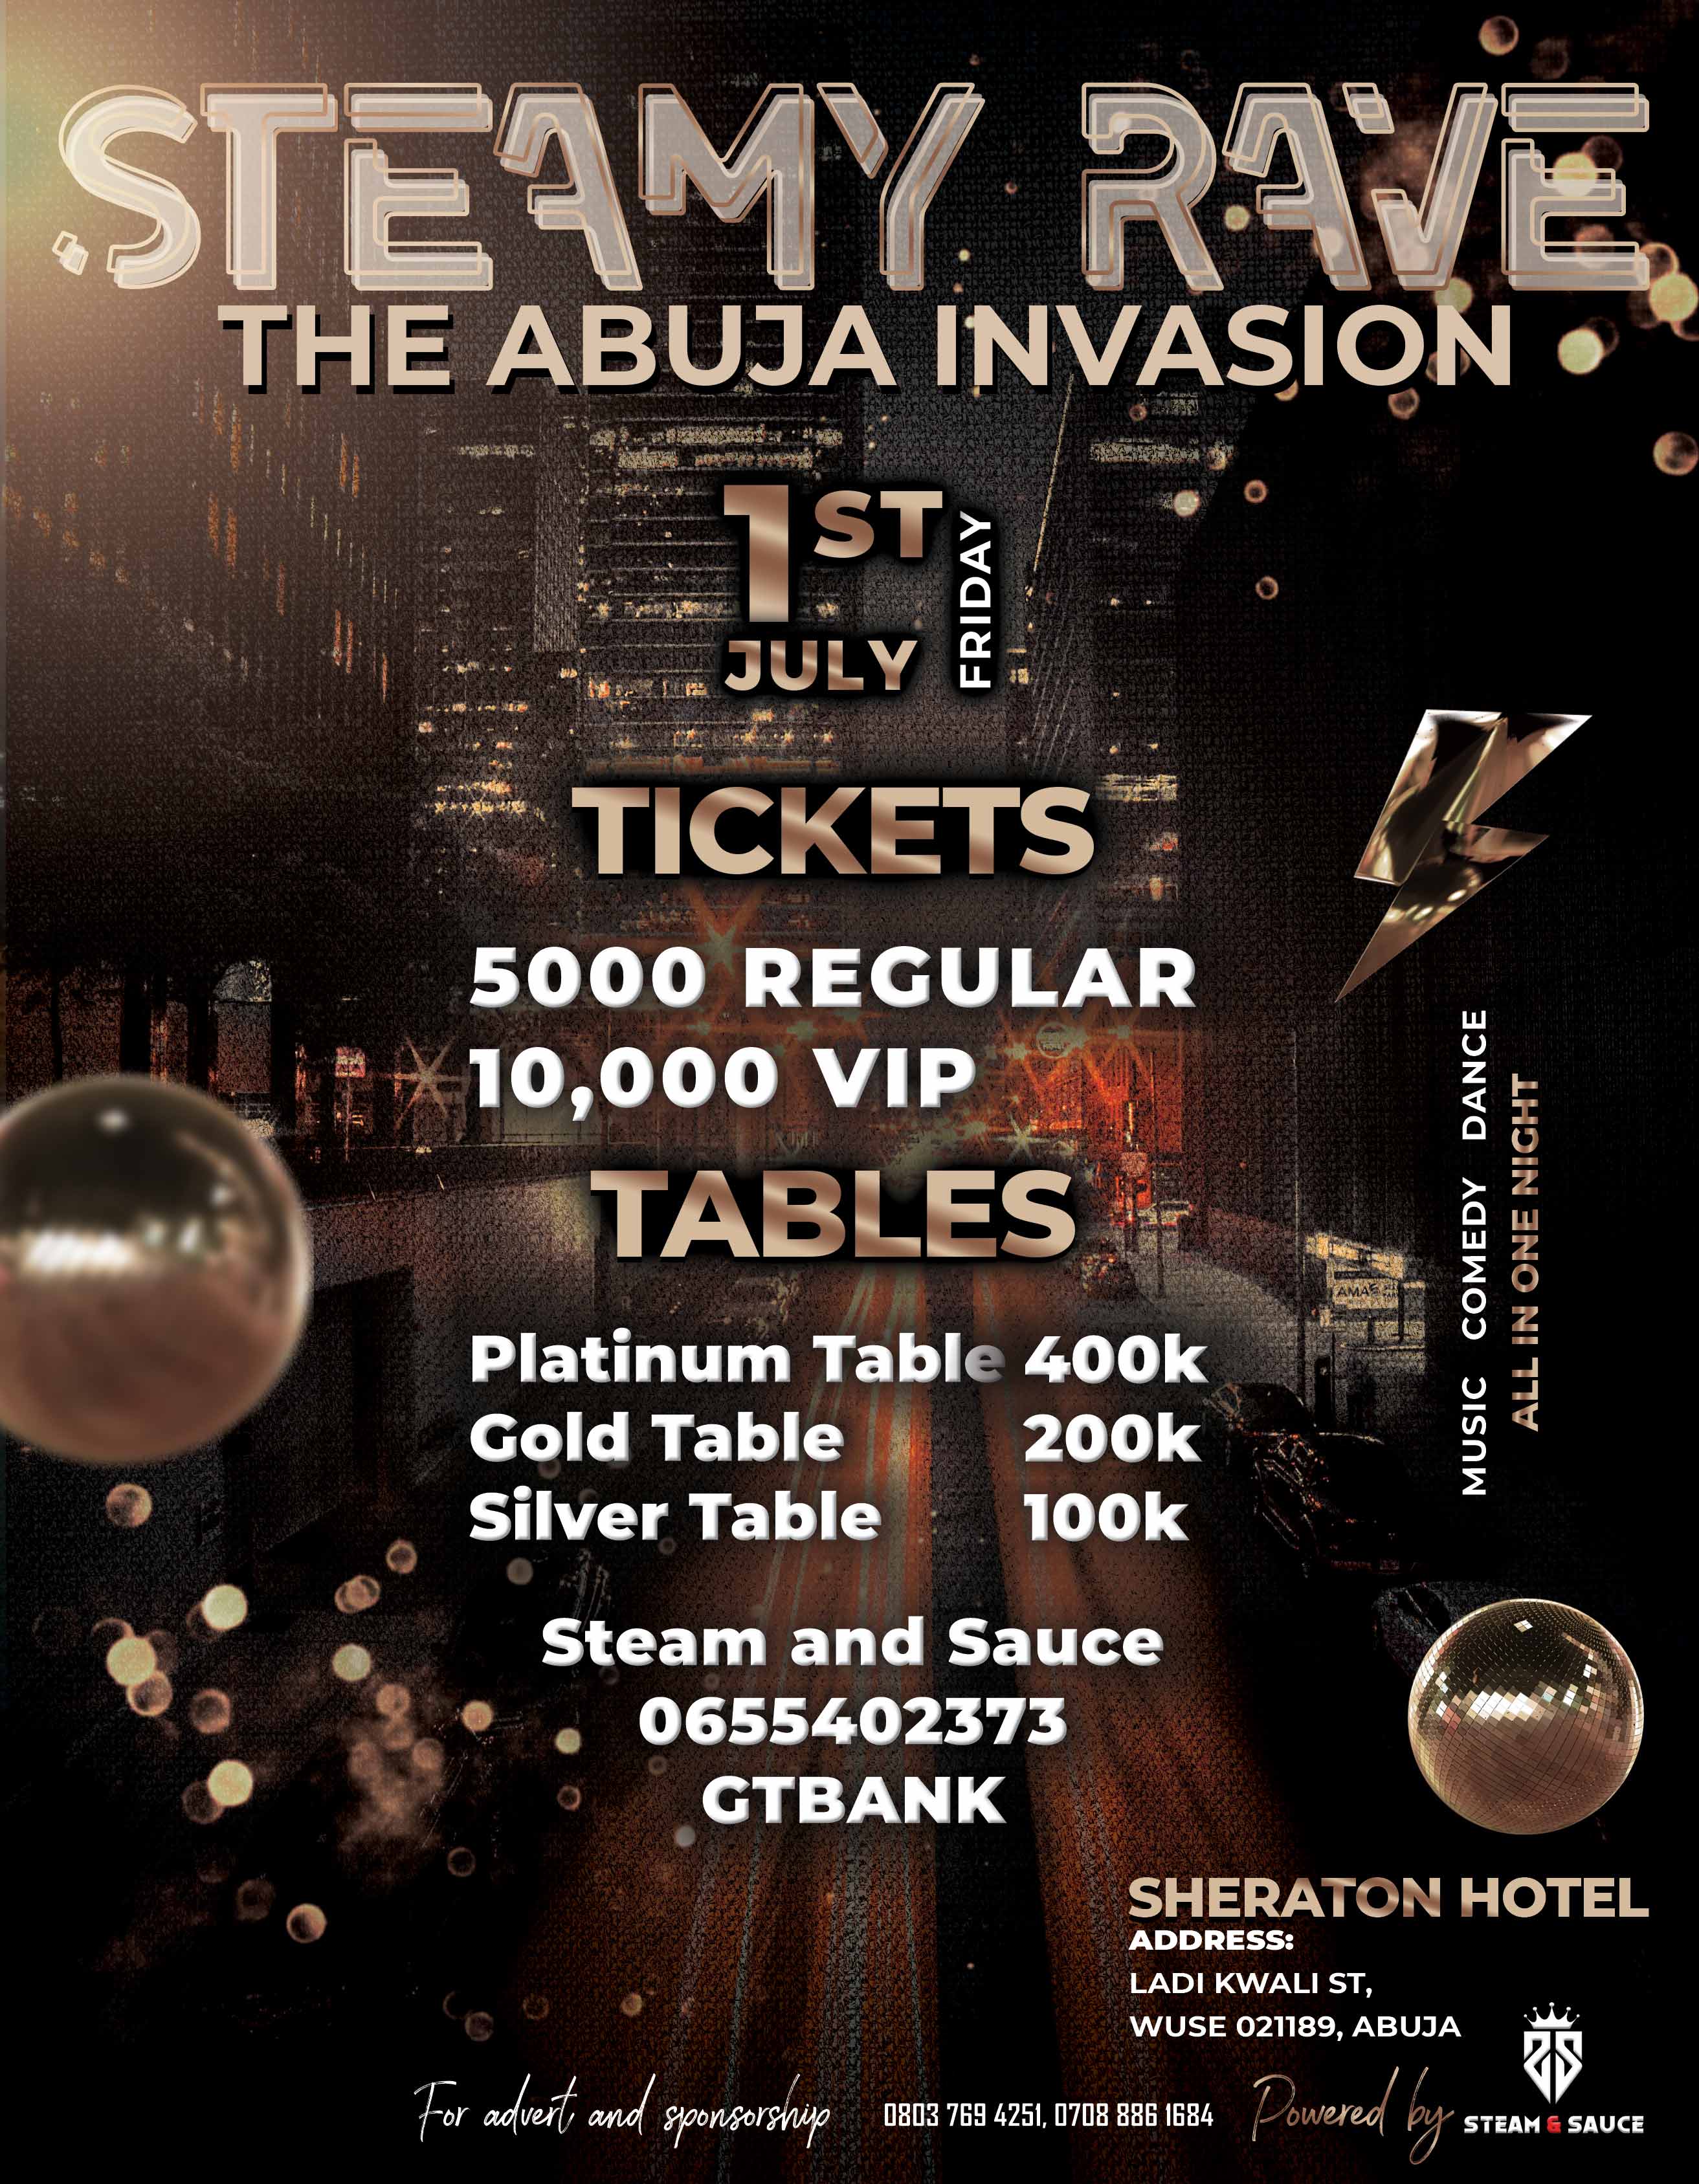 Steamy Rave - The Abuja Invasion Post free event in Nigeria using tickethub.ng, buy and sell tickets to event